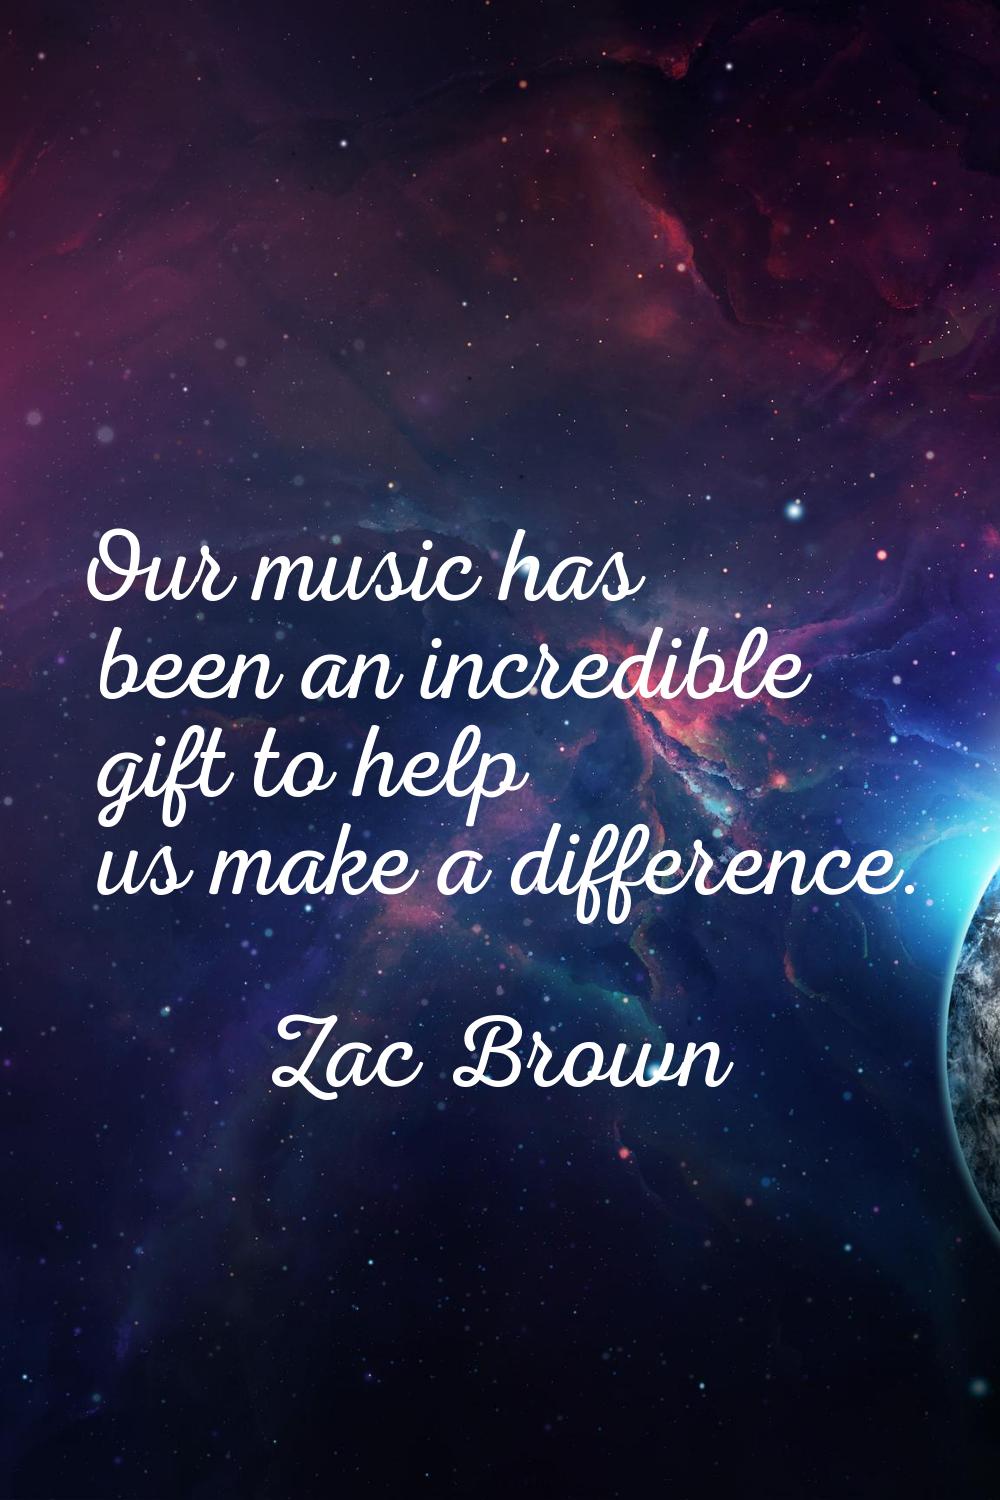 Our music has been an incredible gift to help us make a difference.